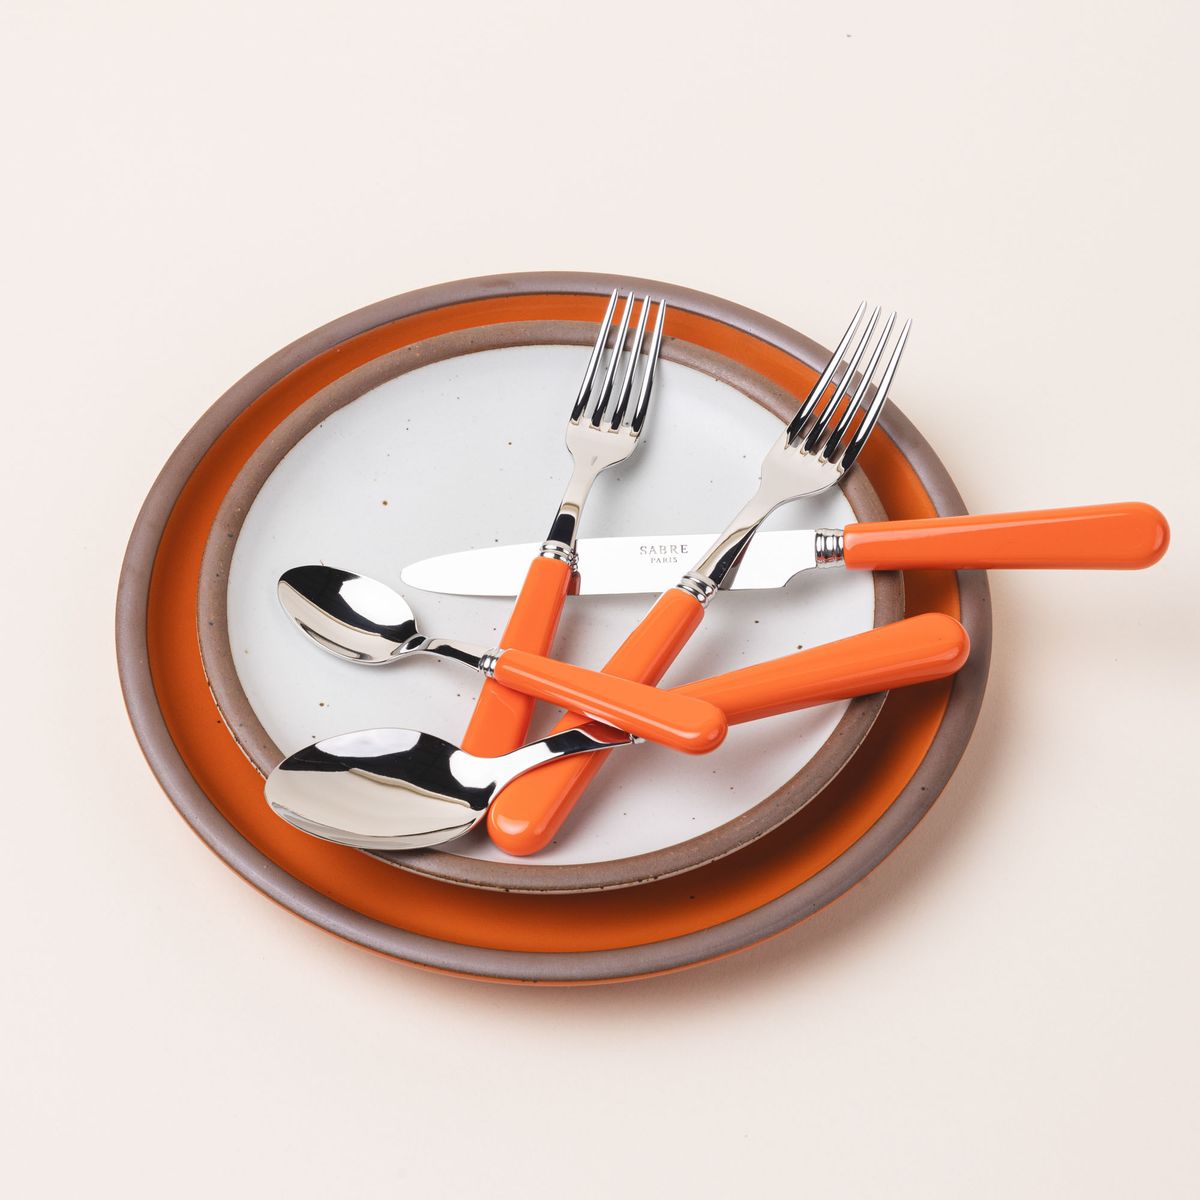 A five piece flatware set with shiny utensils and matte bold orange handles sits on a bold orange and white ceramic plates